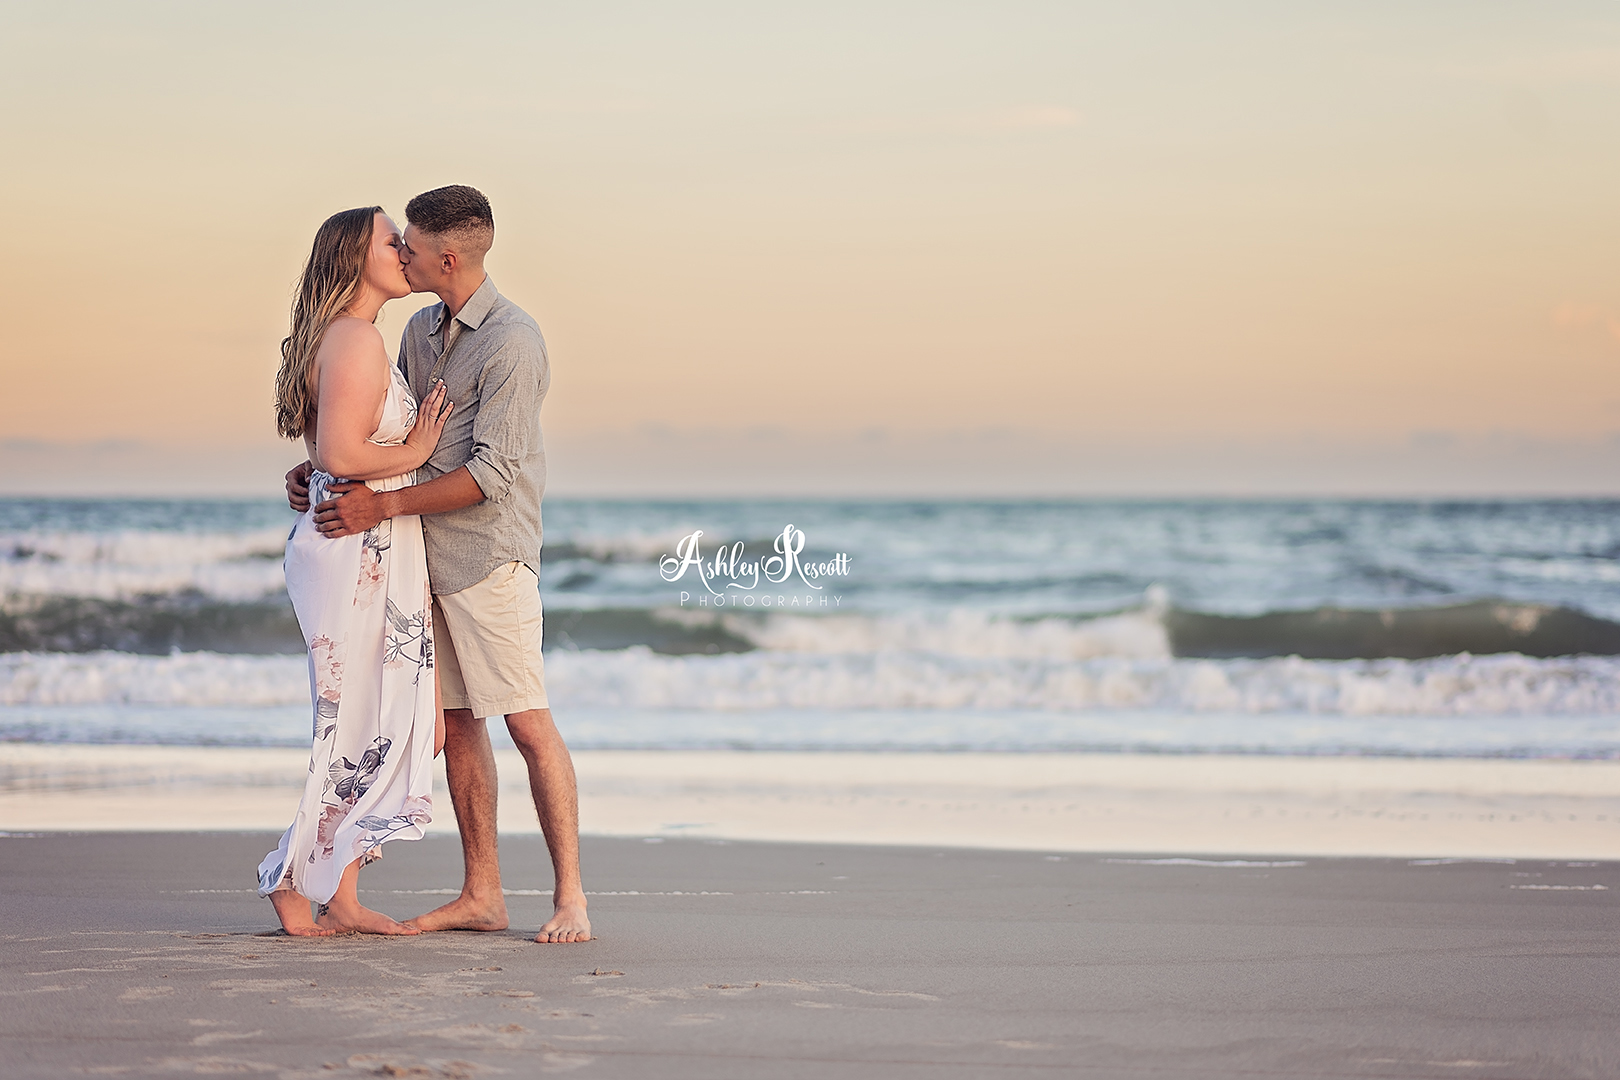 Young couple on beach at sunset